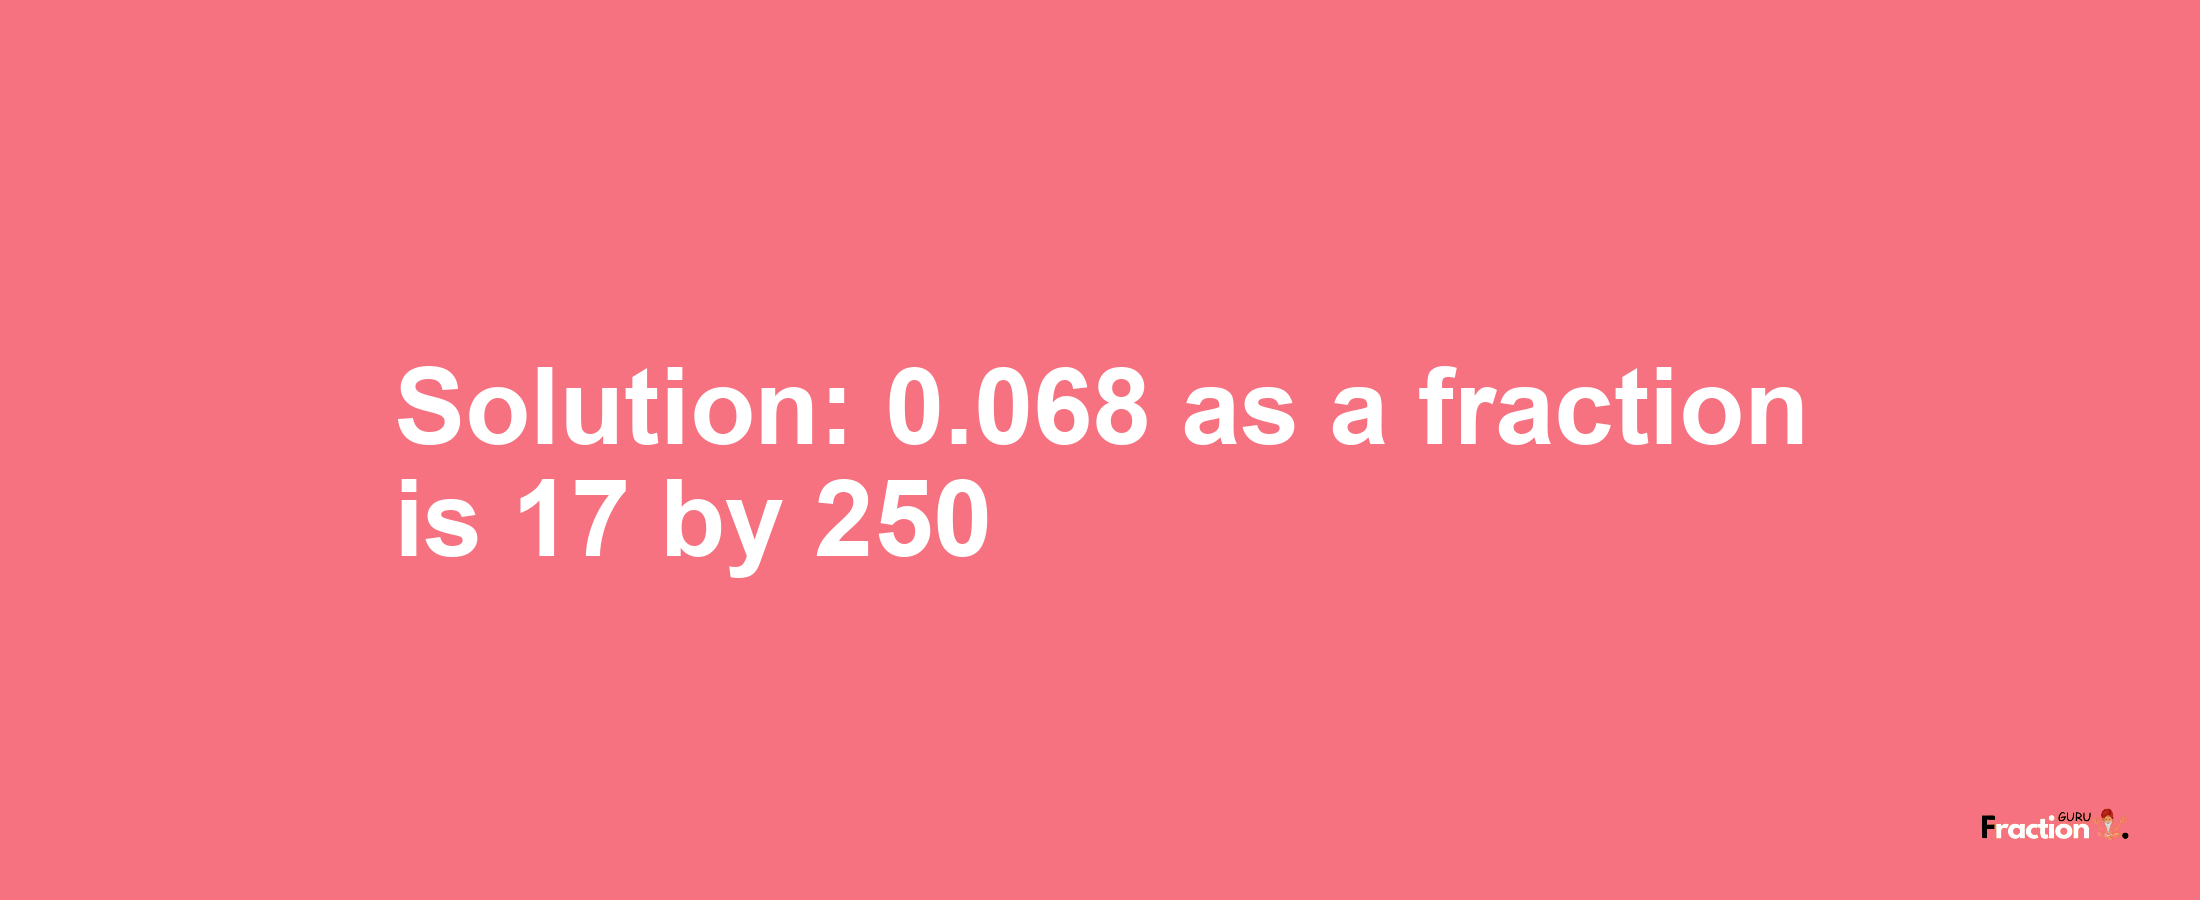 Solution:0.068 as a fraction is 17/250